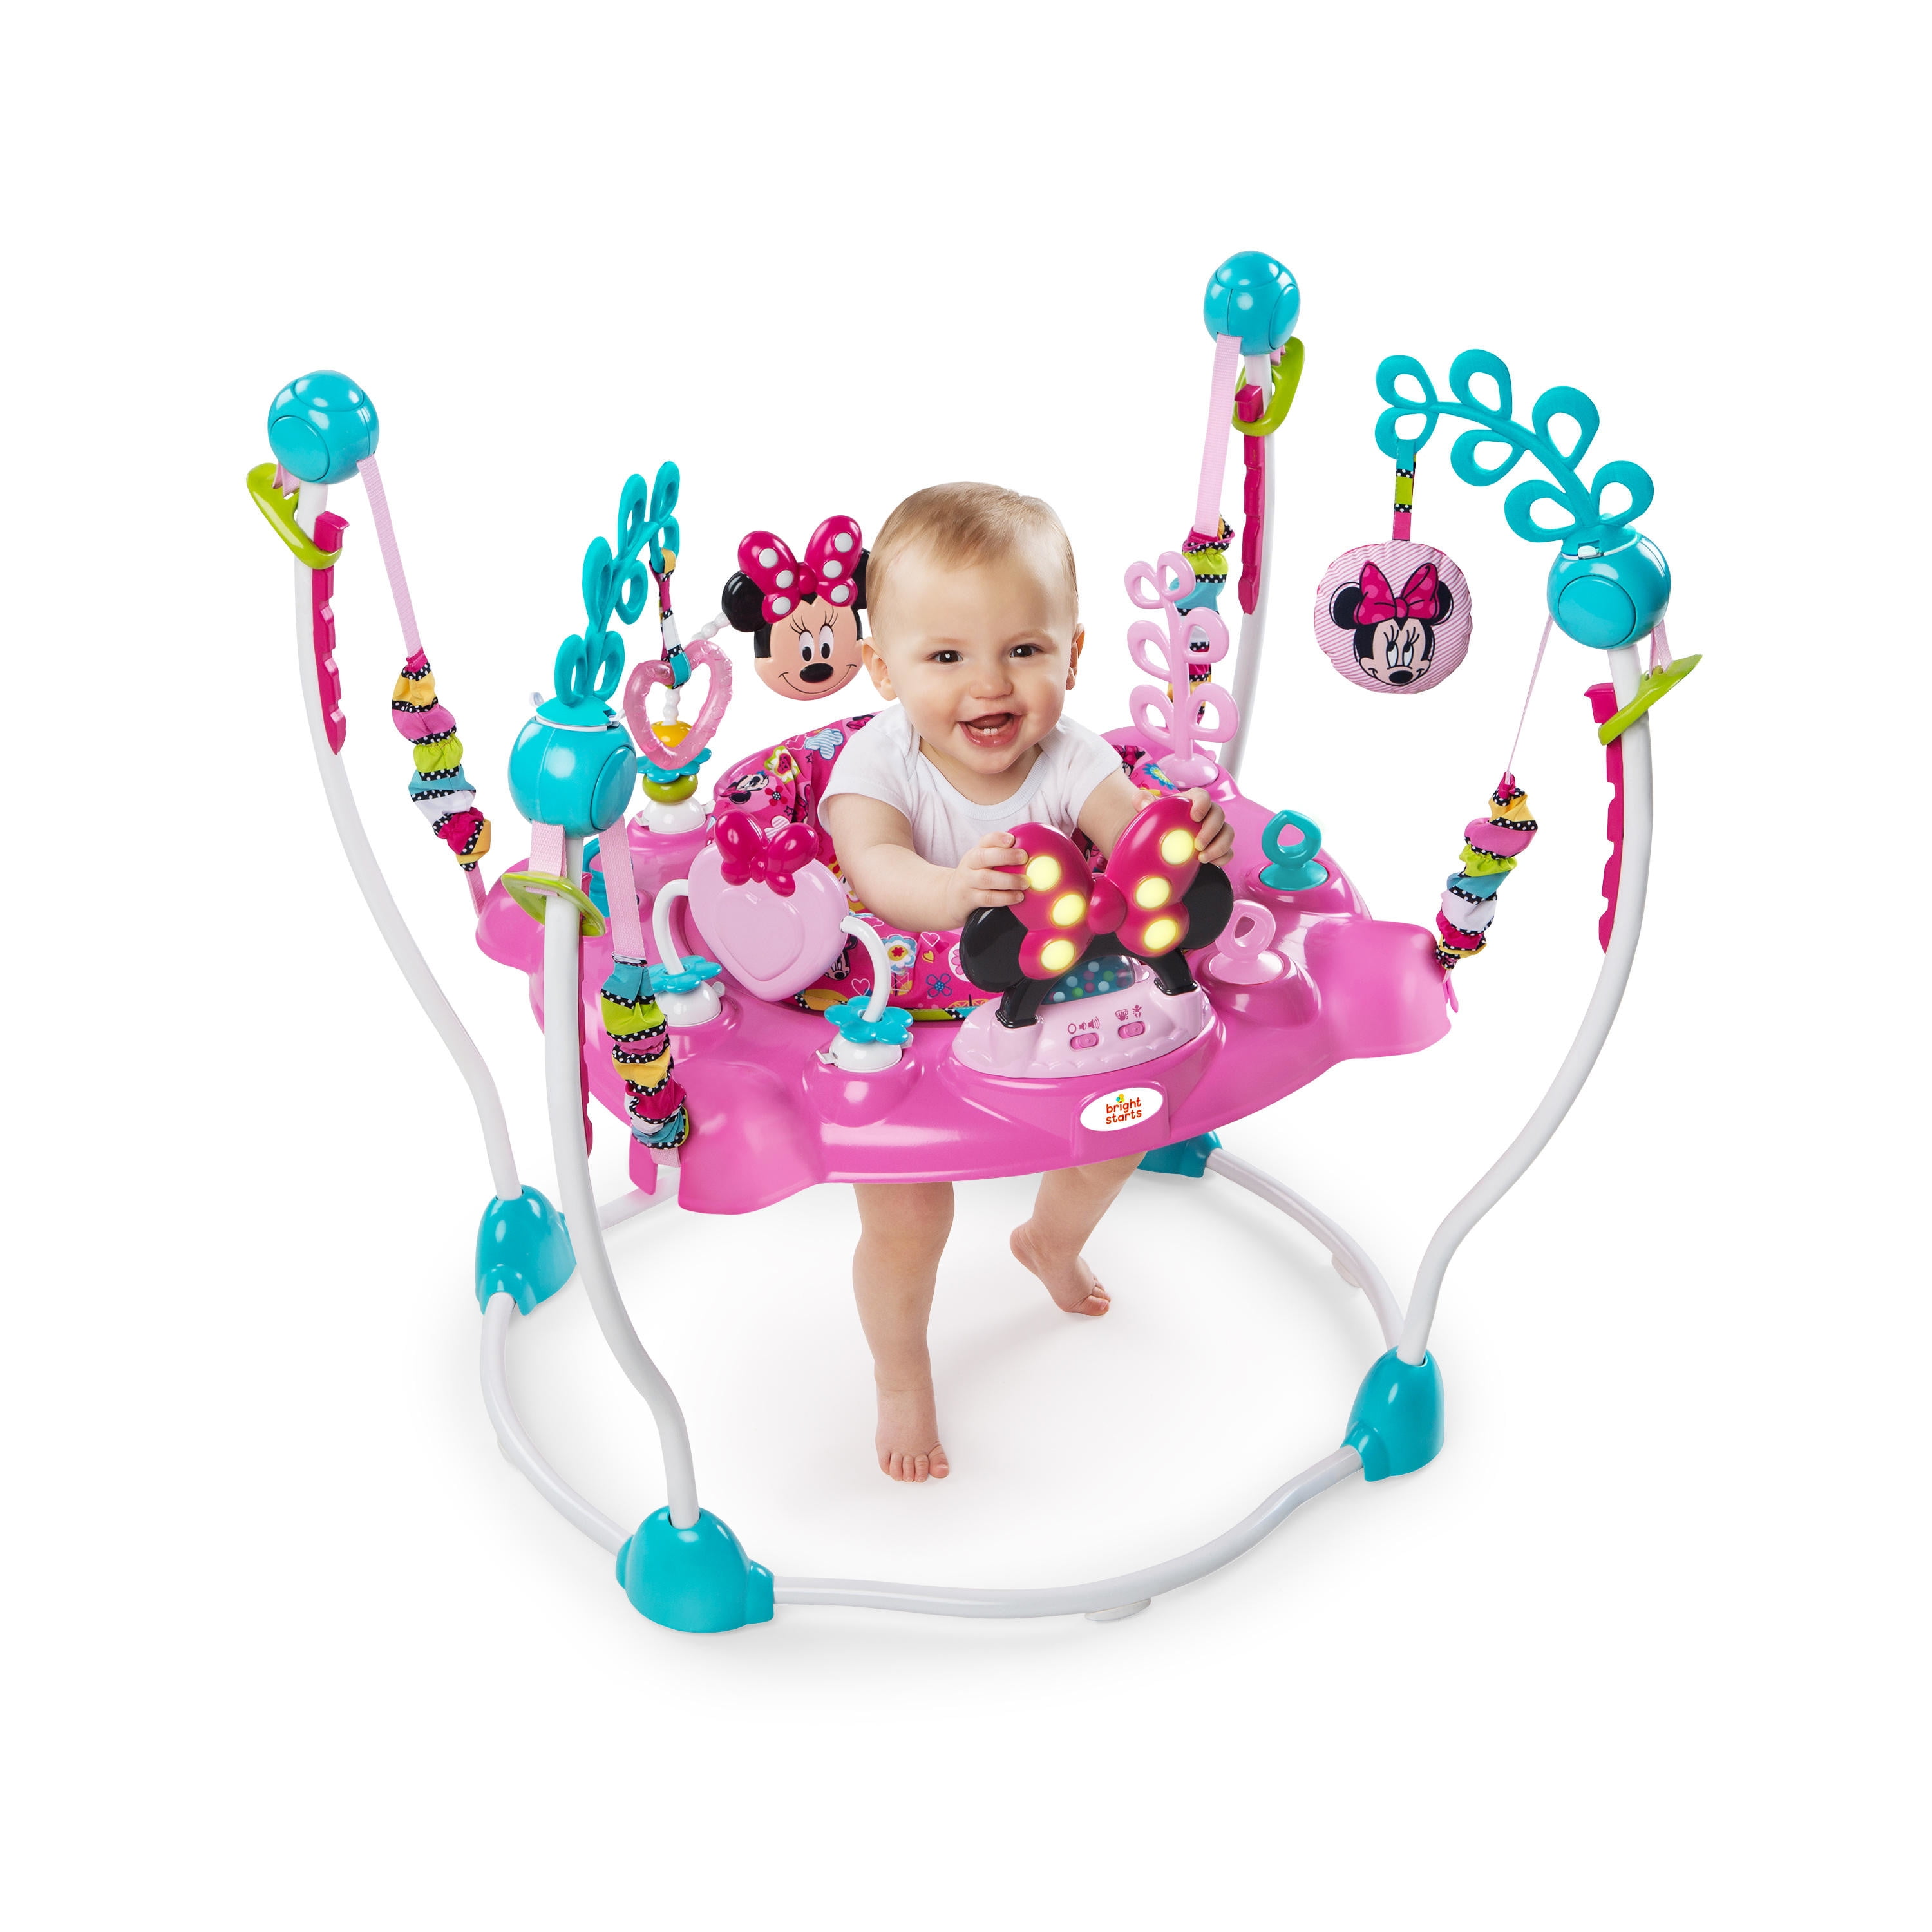 minnie mouse activity jumper